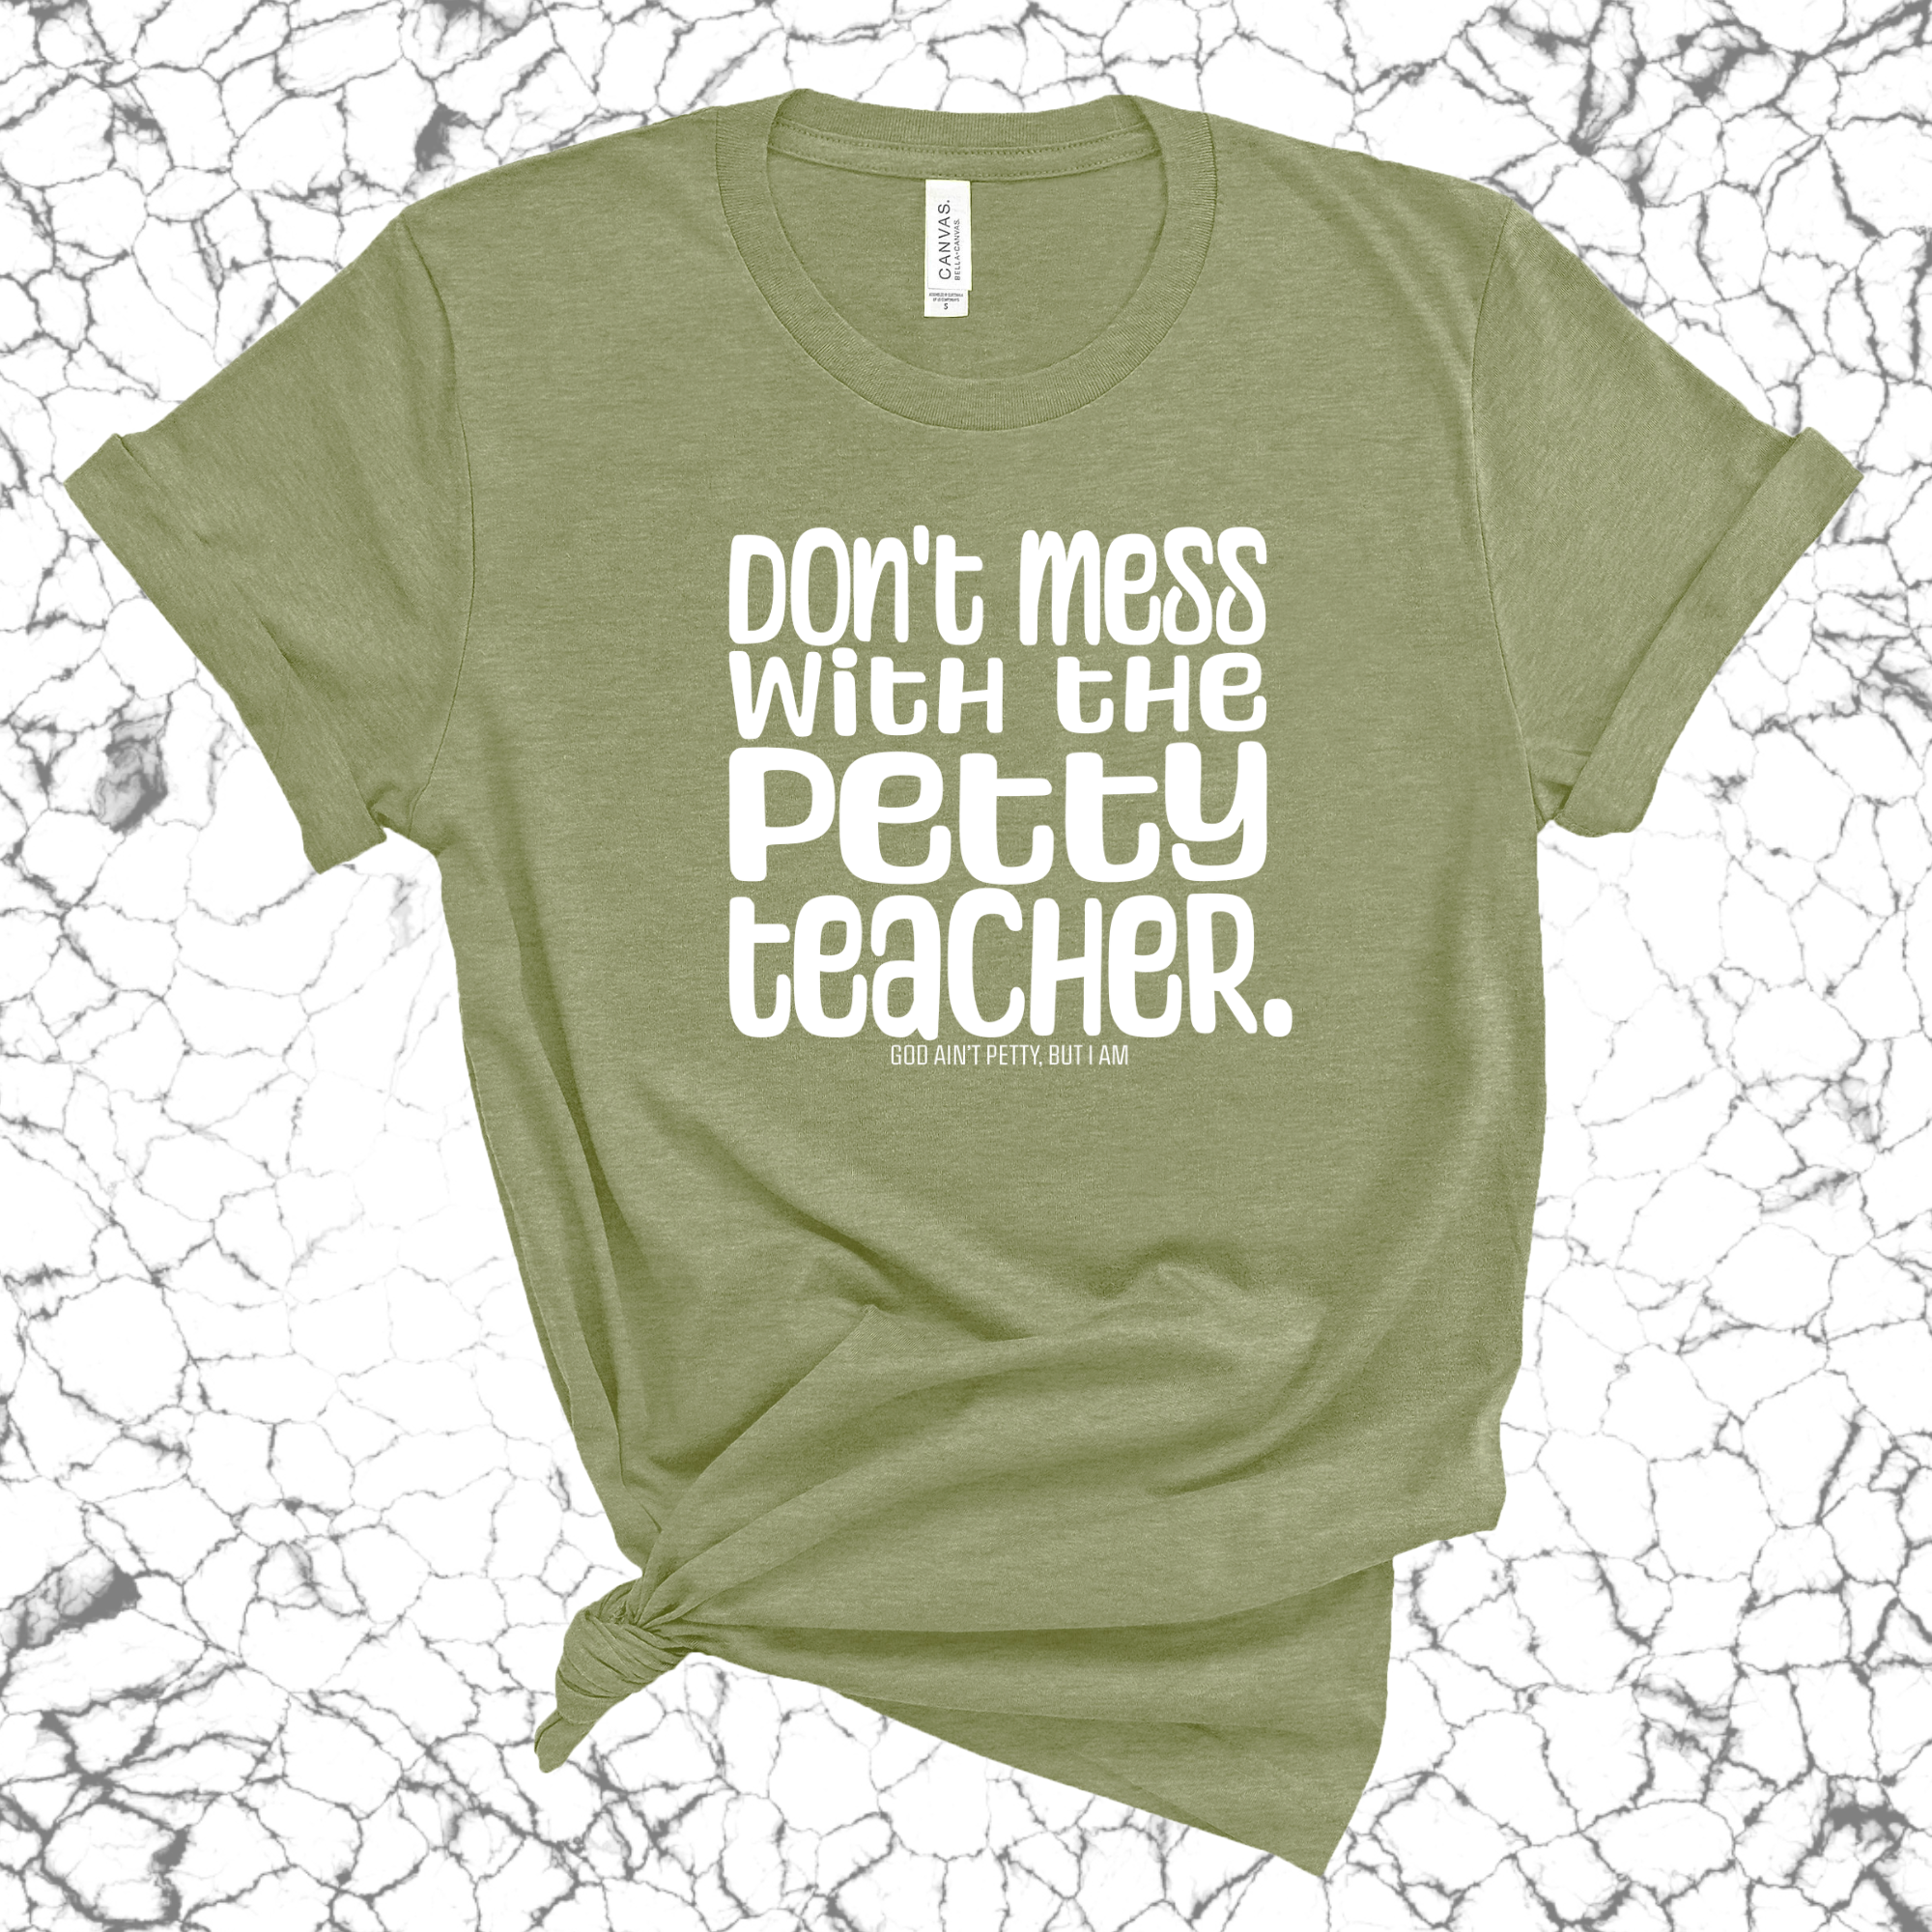 Don't Mess with the Petty Teacher Unisex Tee (MILITARY GREEN/WHITE)-T-Shirt-The Original God Ain't Petty But I Am